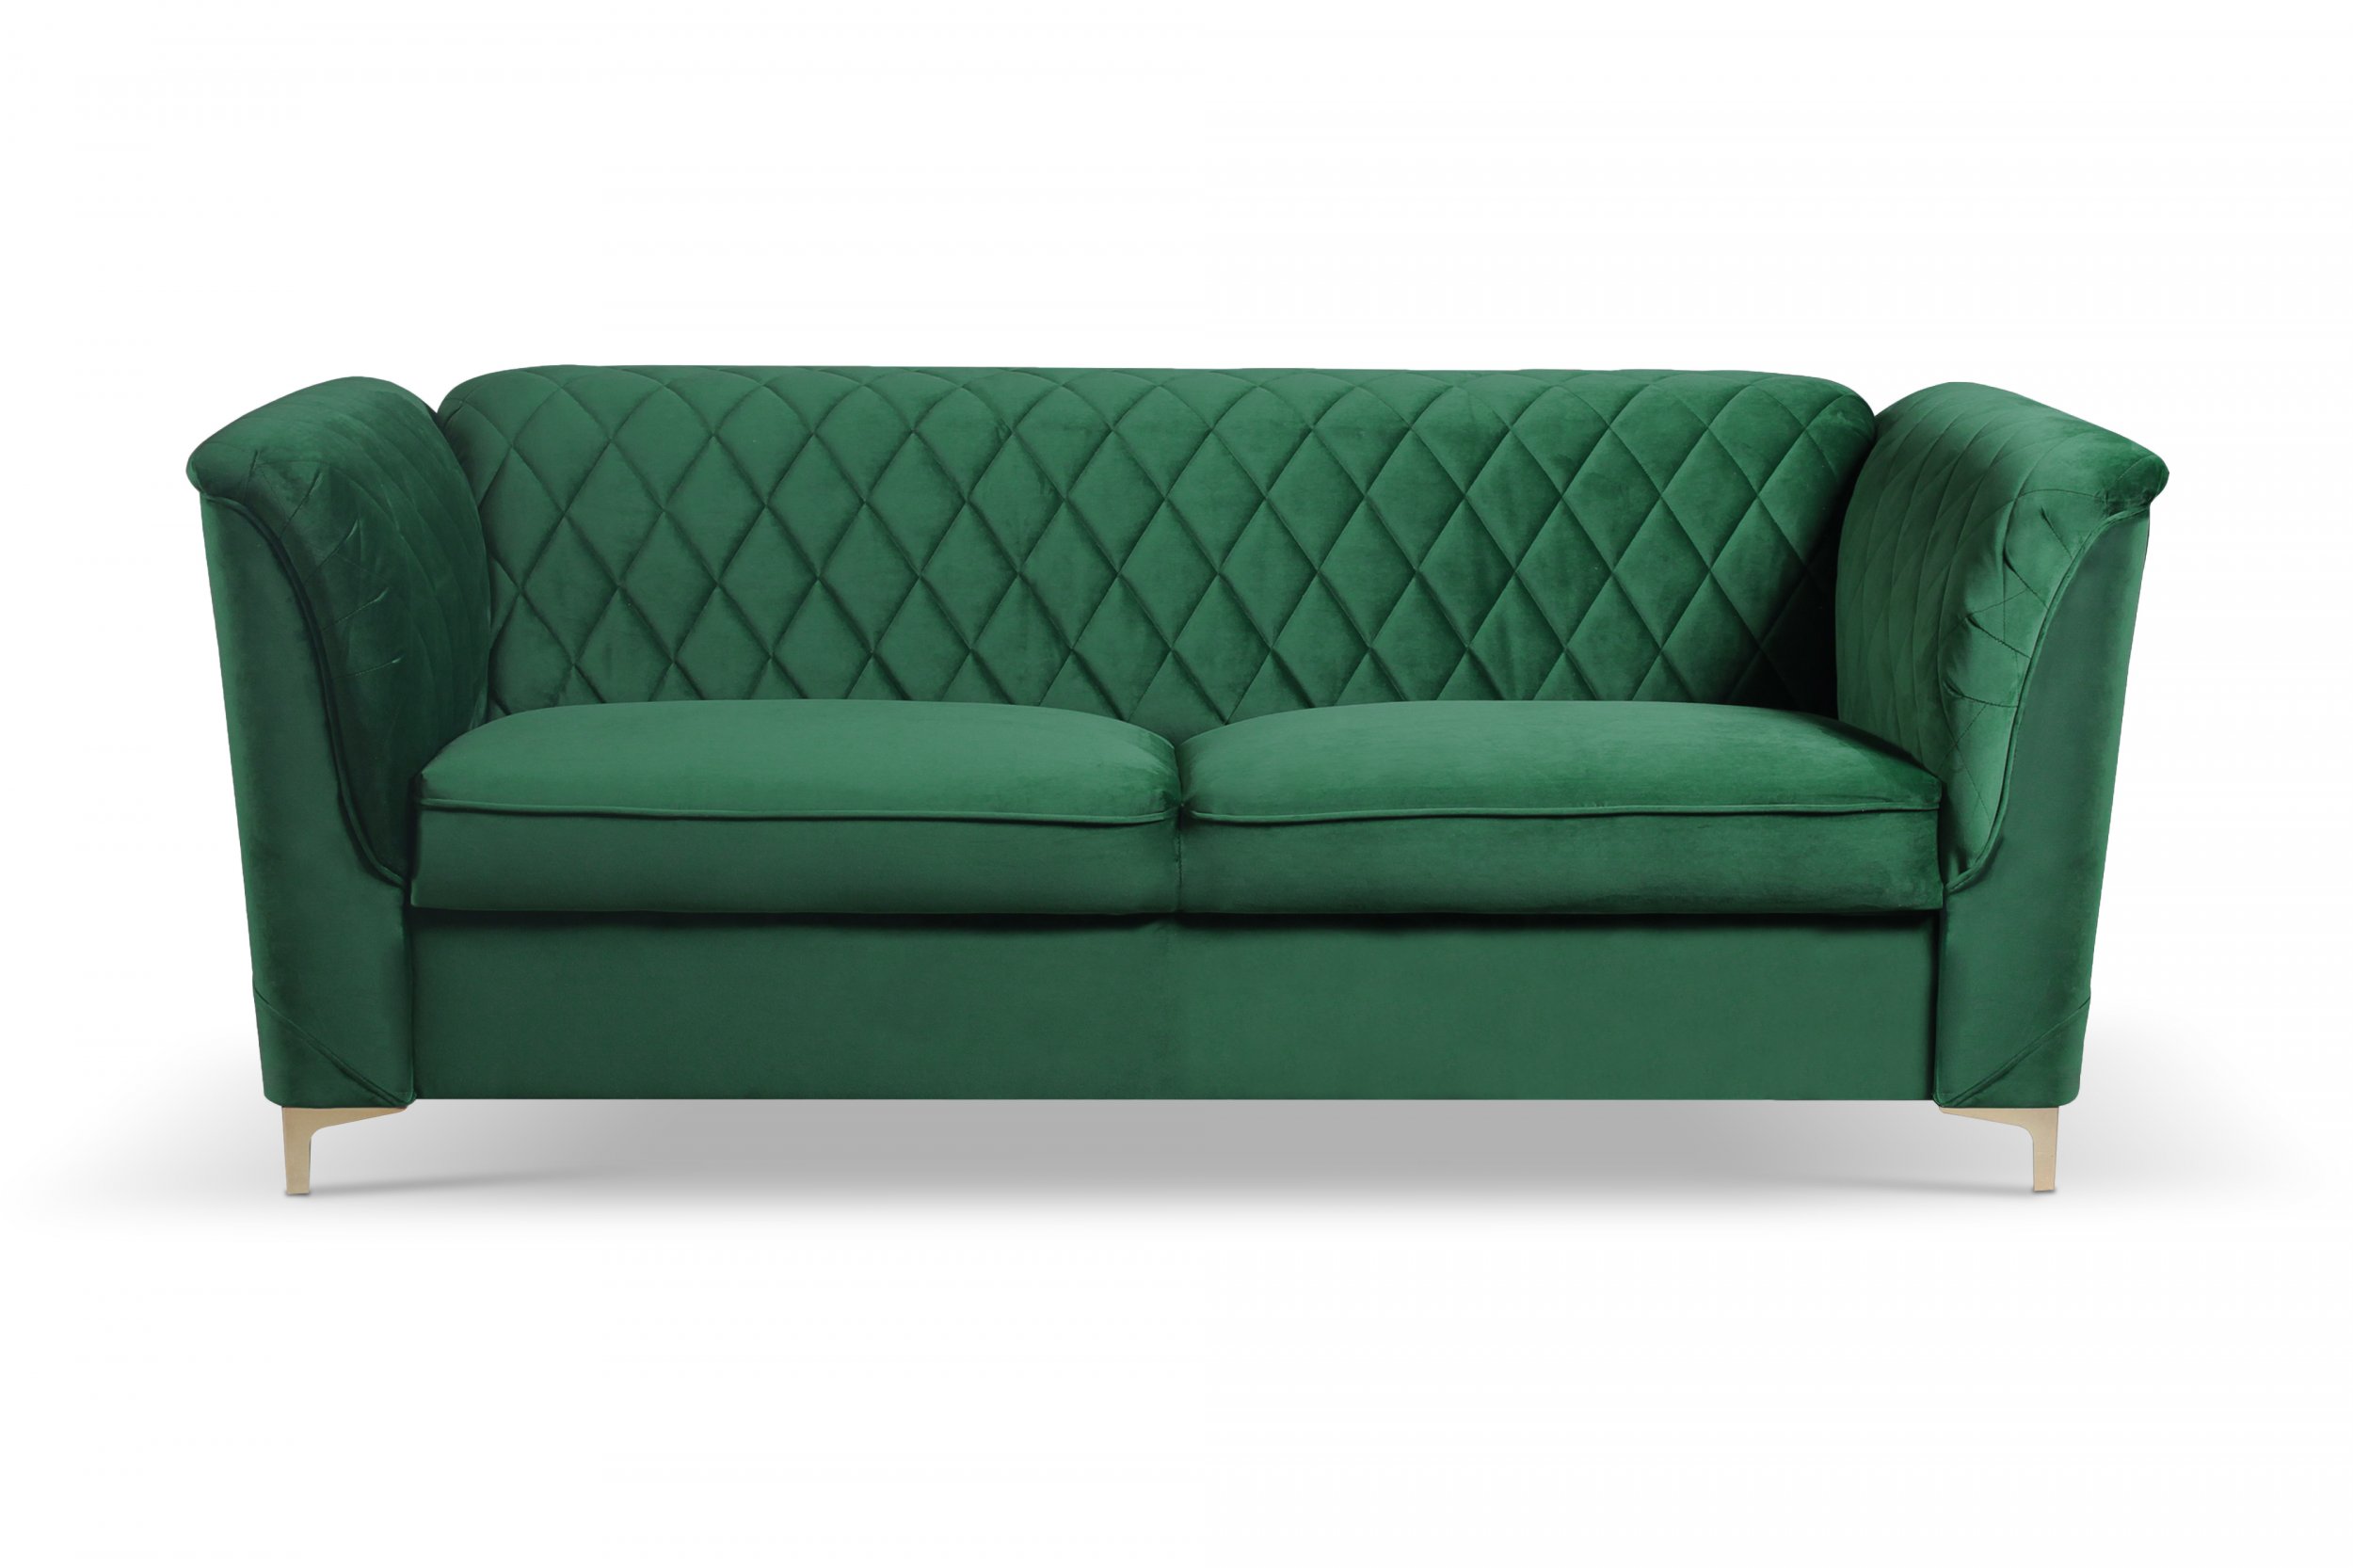 Lille Lux - 3 Seater Sofa | The Clearance Zone